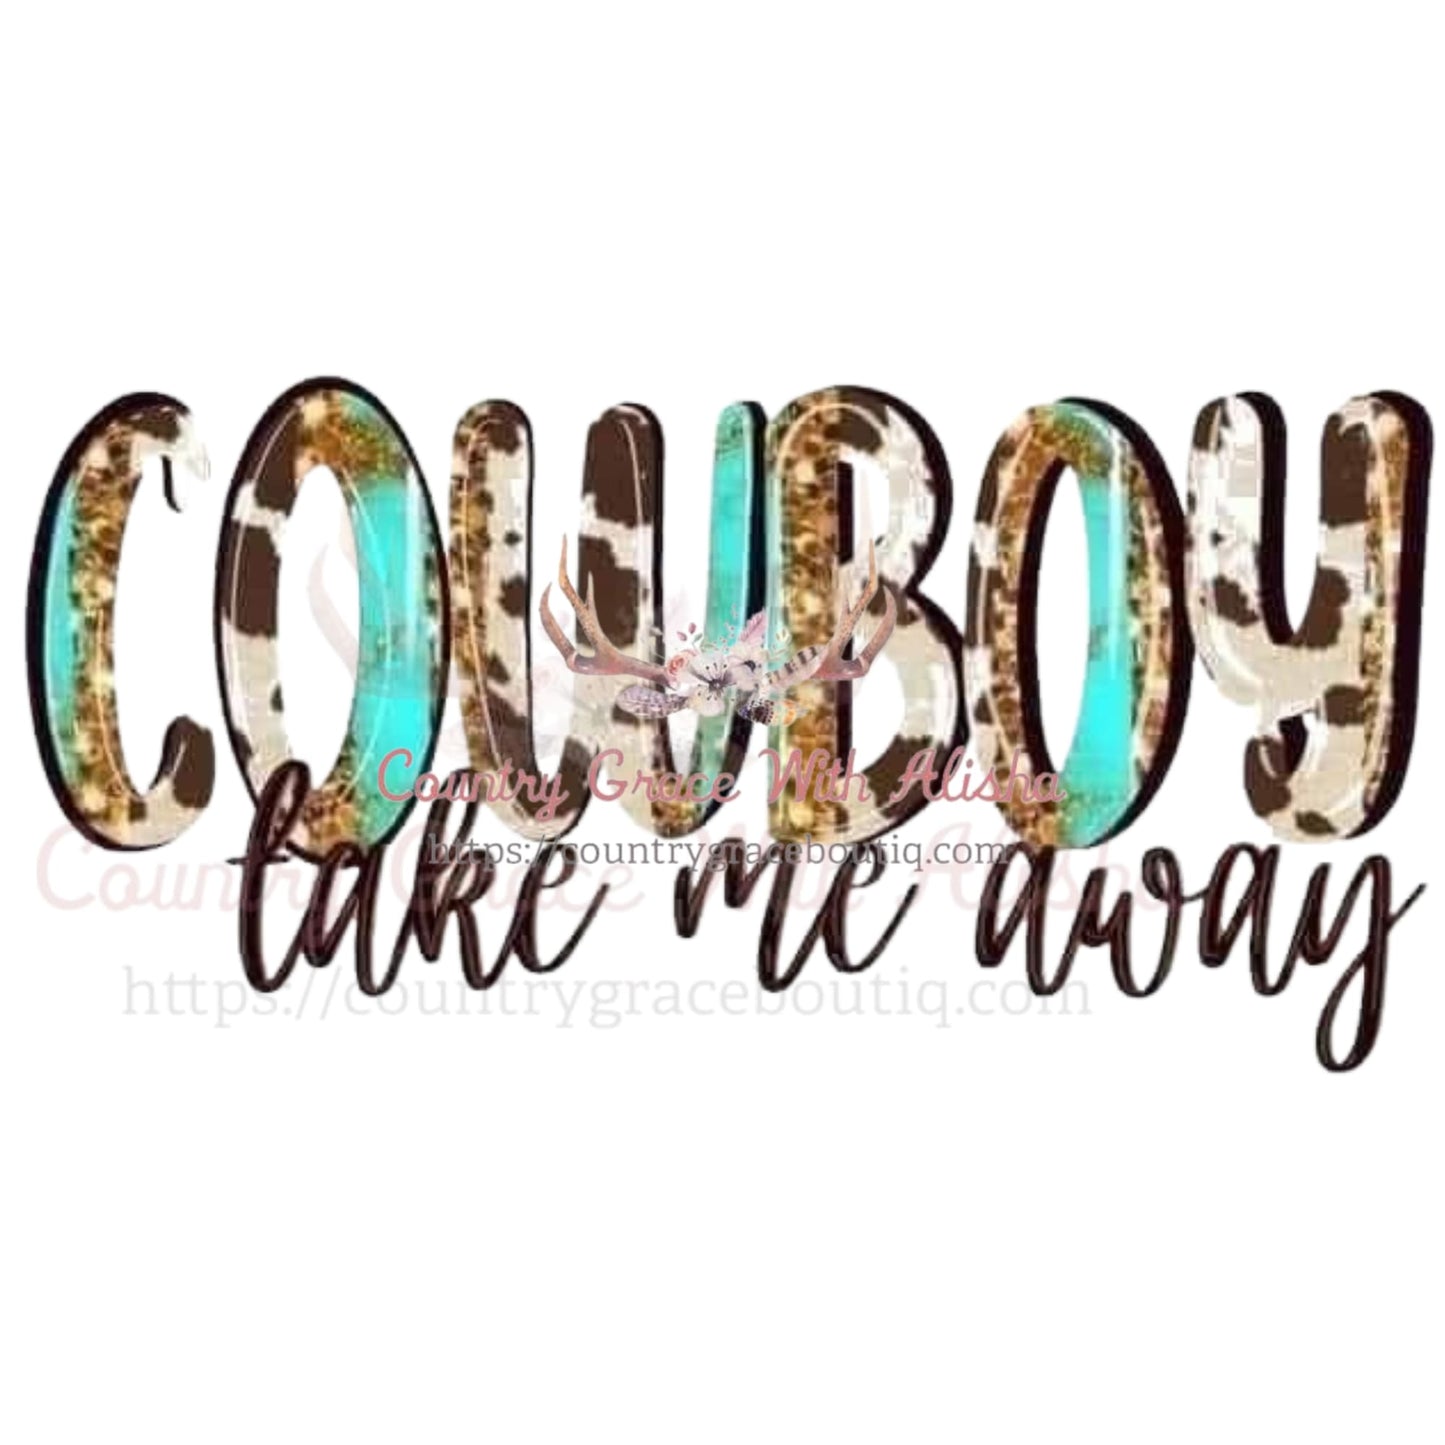 Cowboy Take Me Away Sublimation Transfer - Sub $1.50 Country